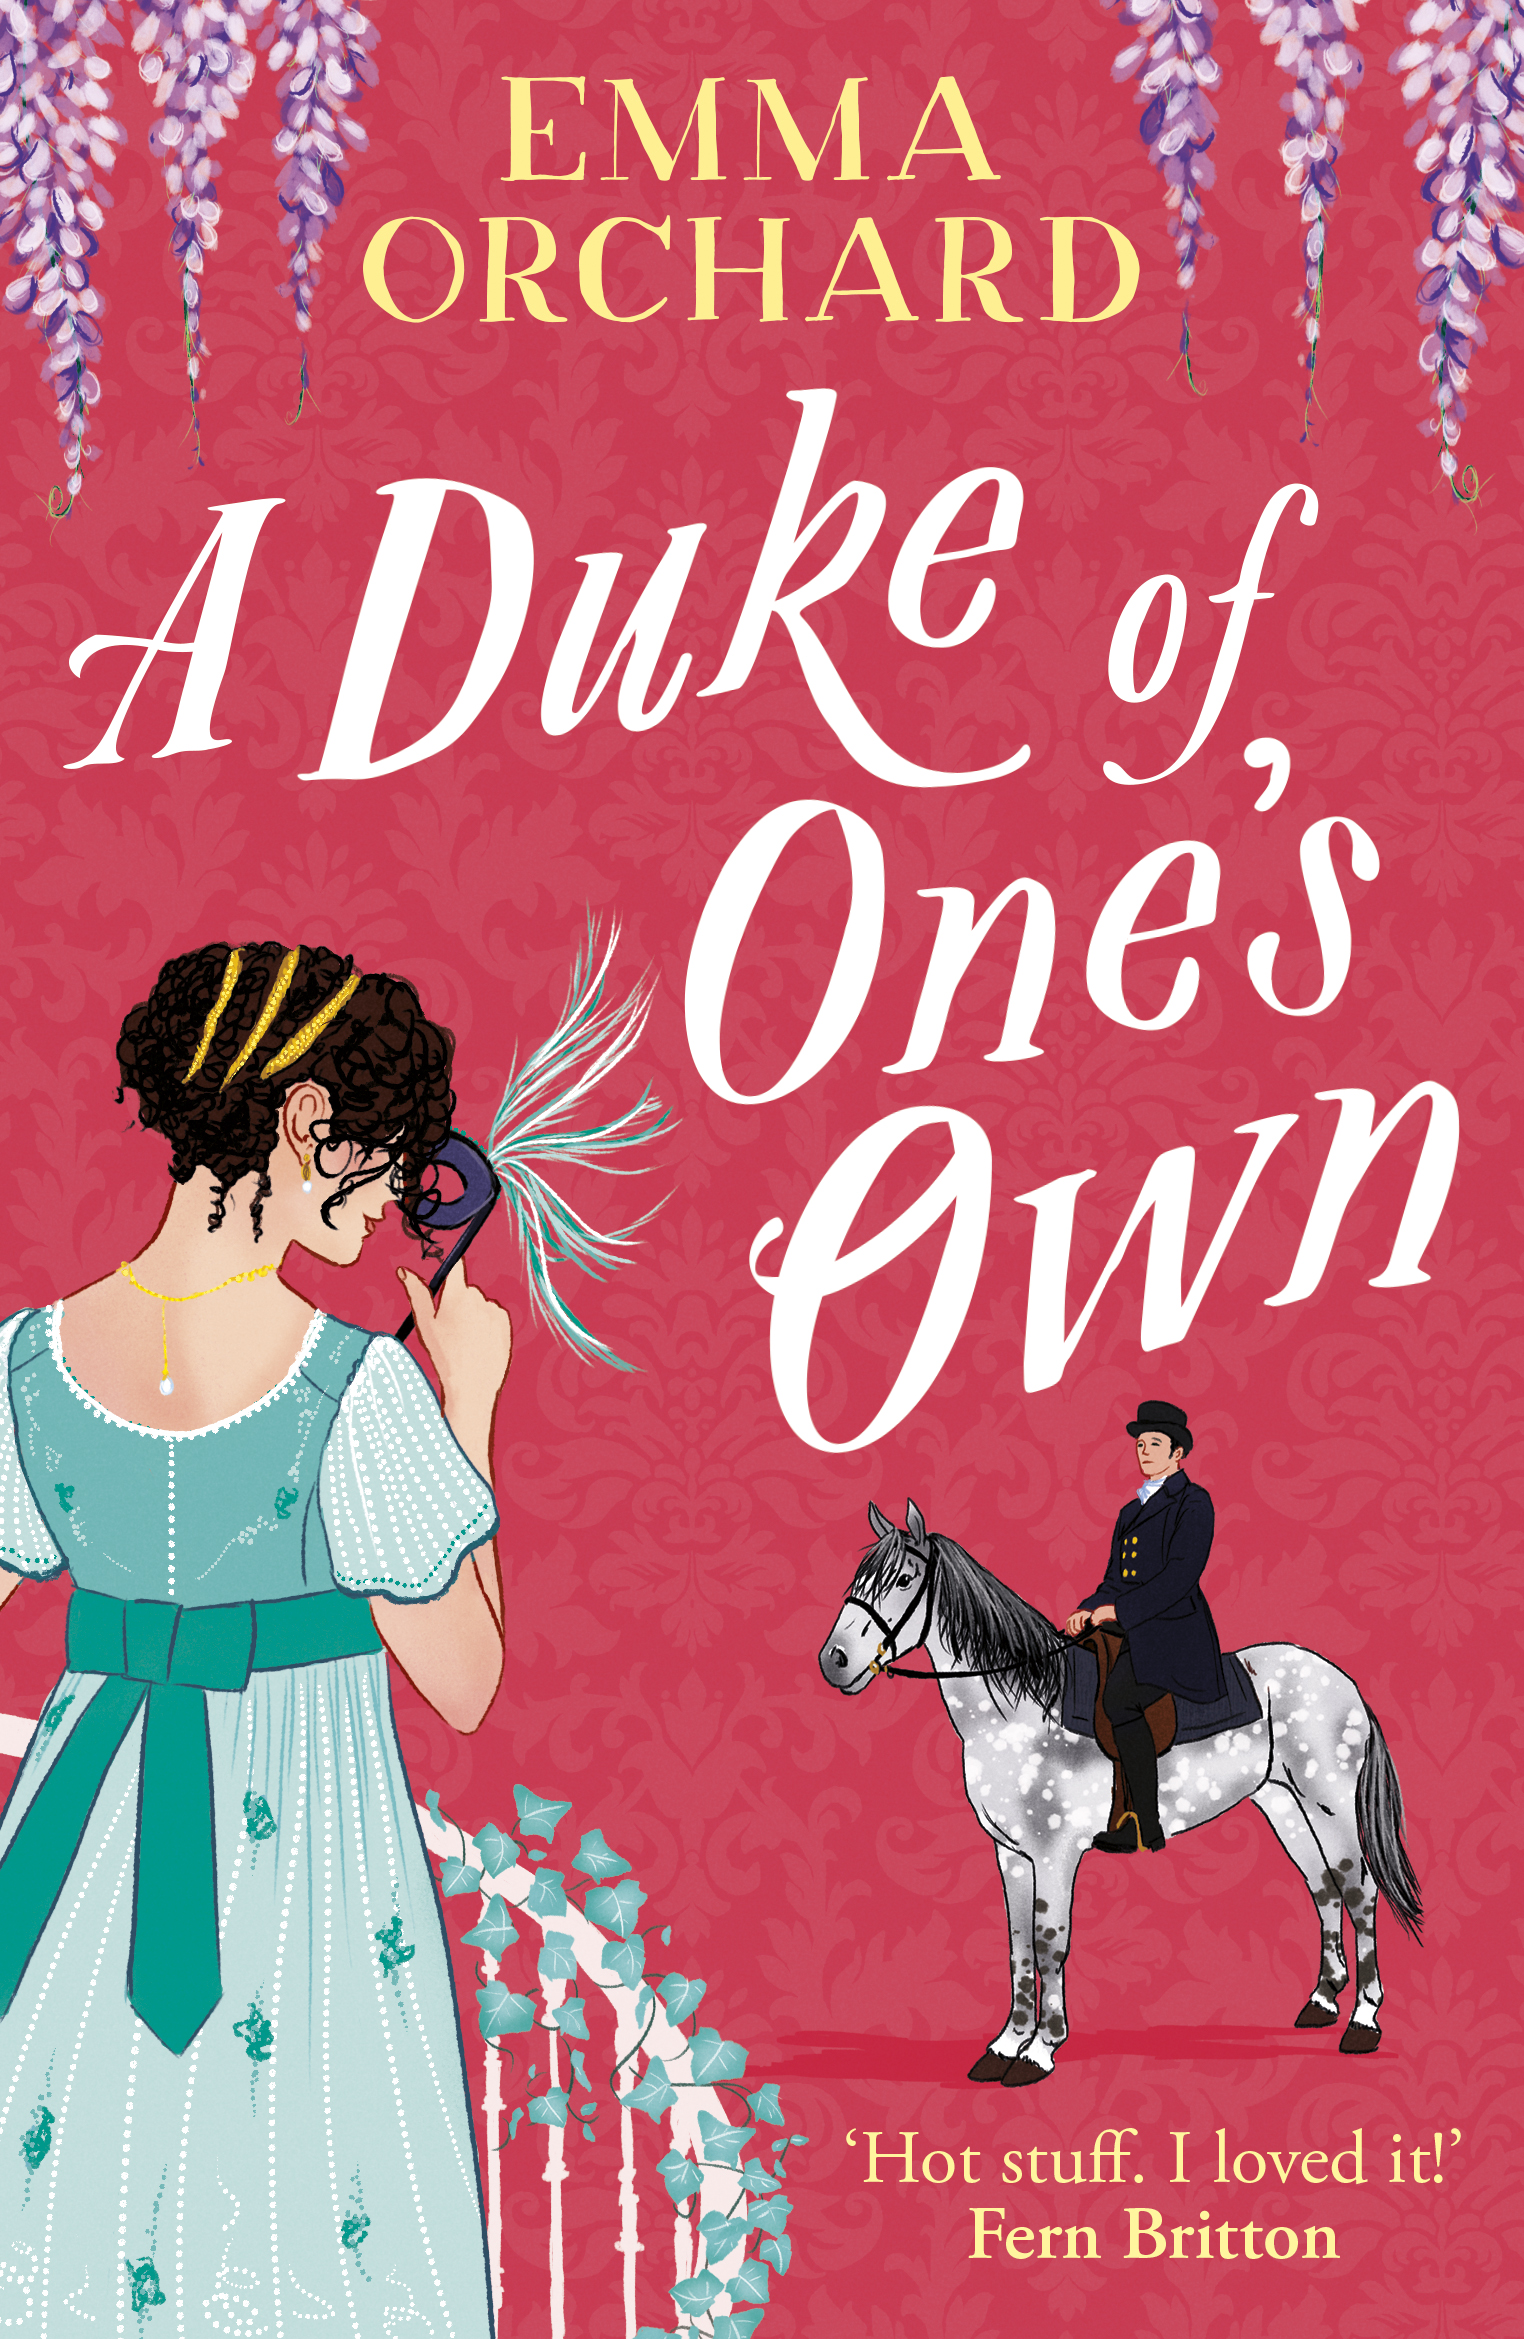 A Duke of One's Own  by Emma Orchard